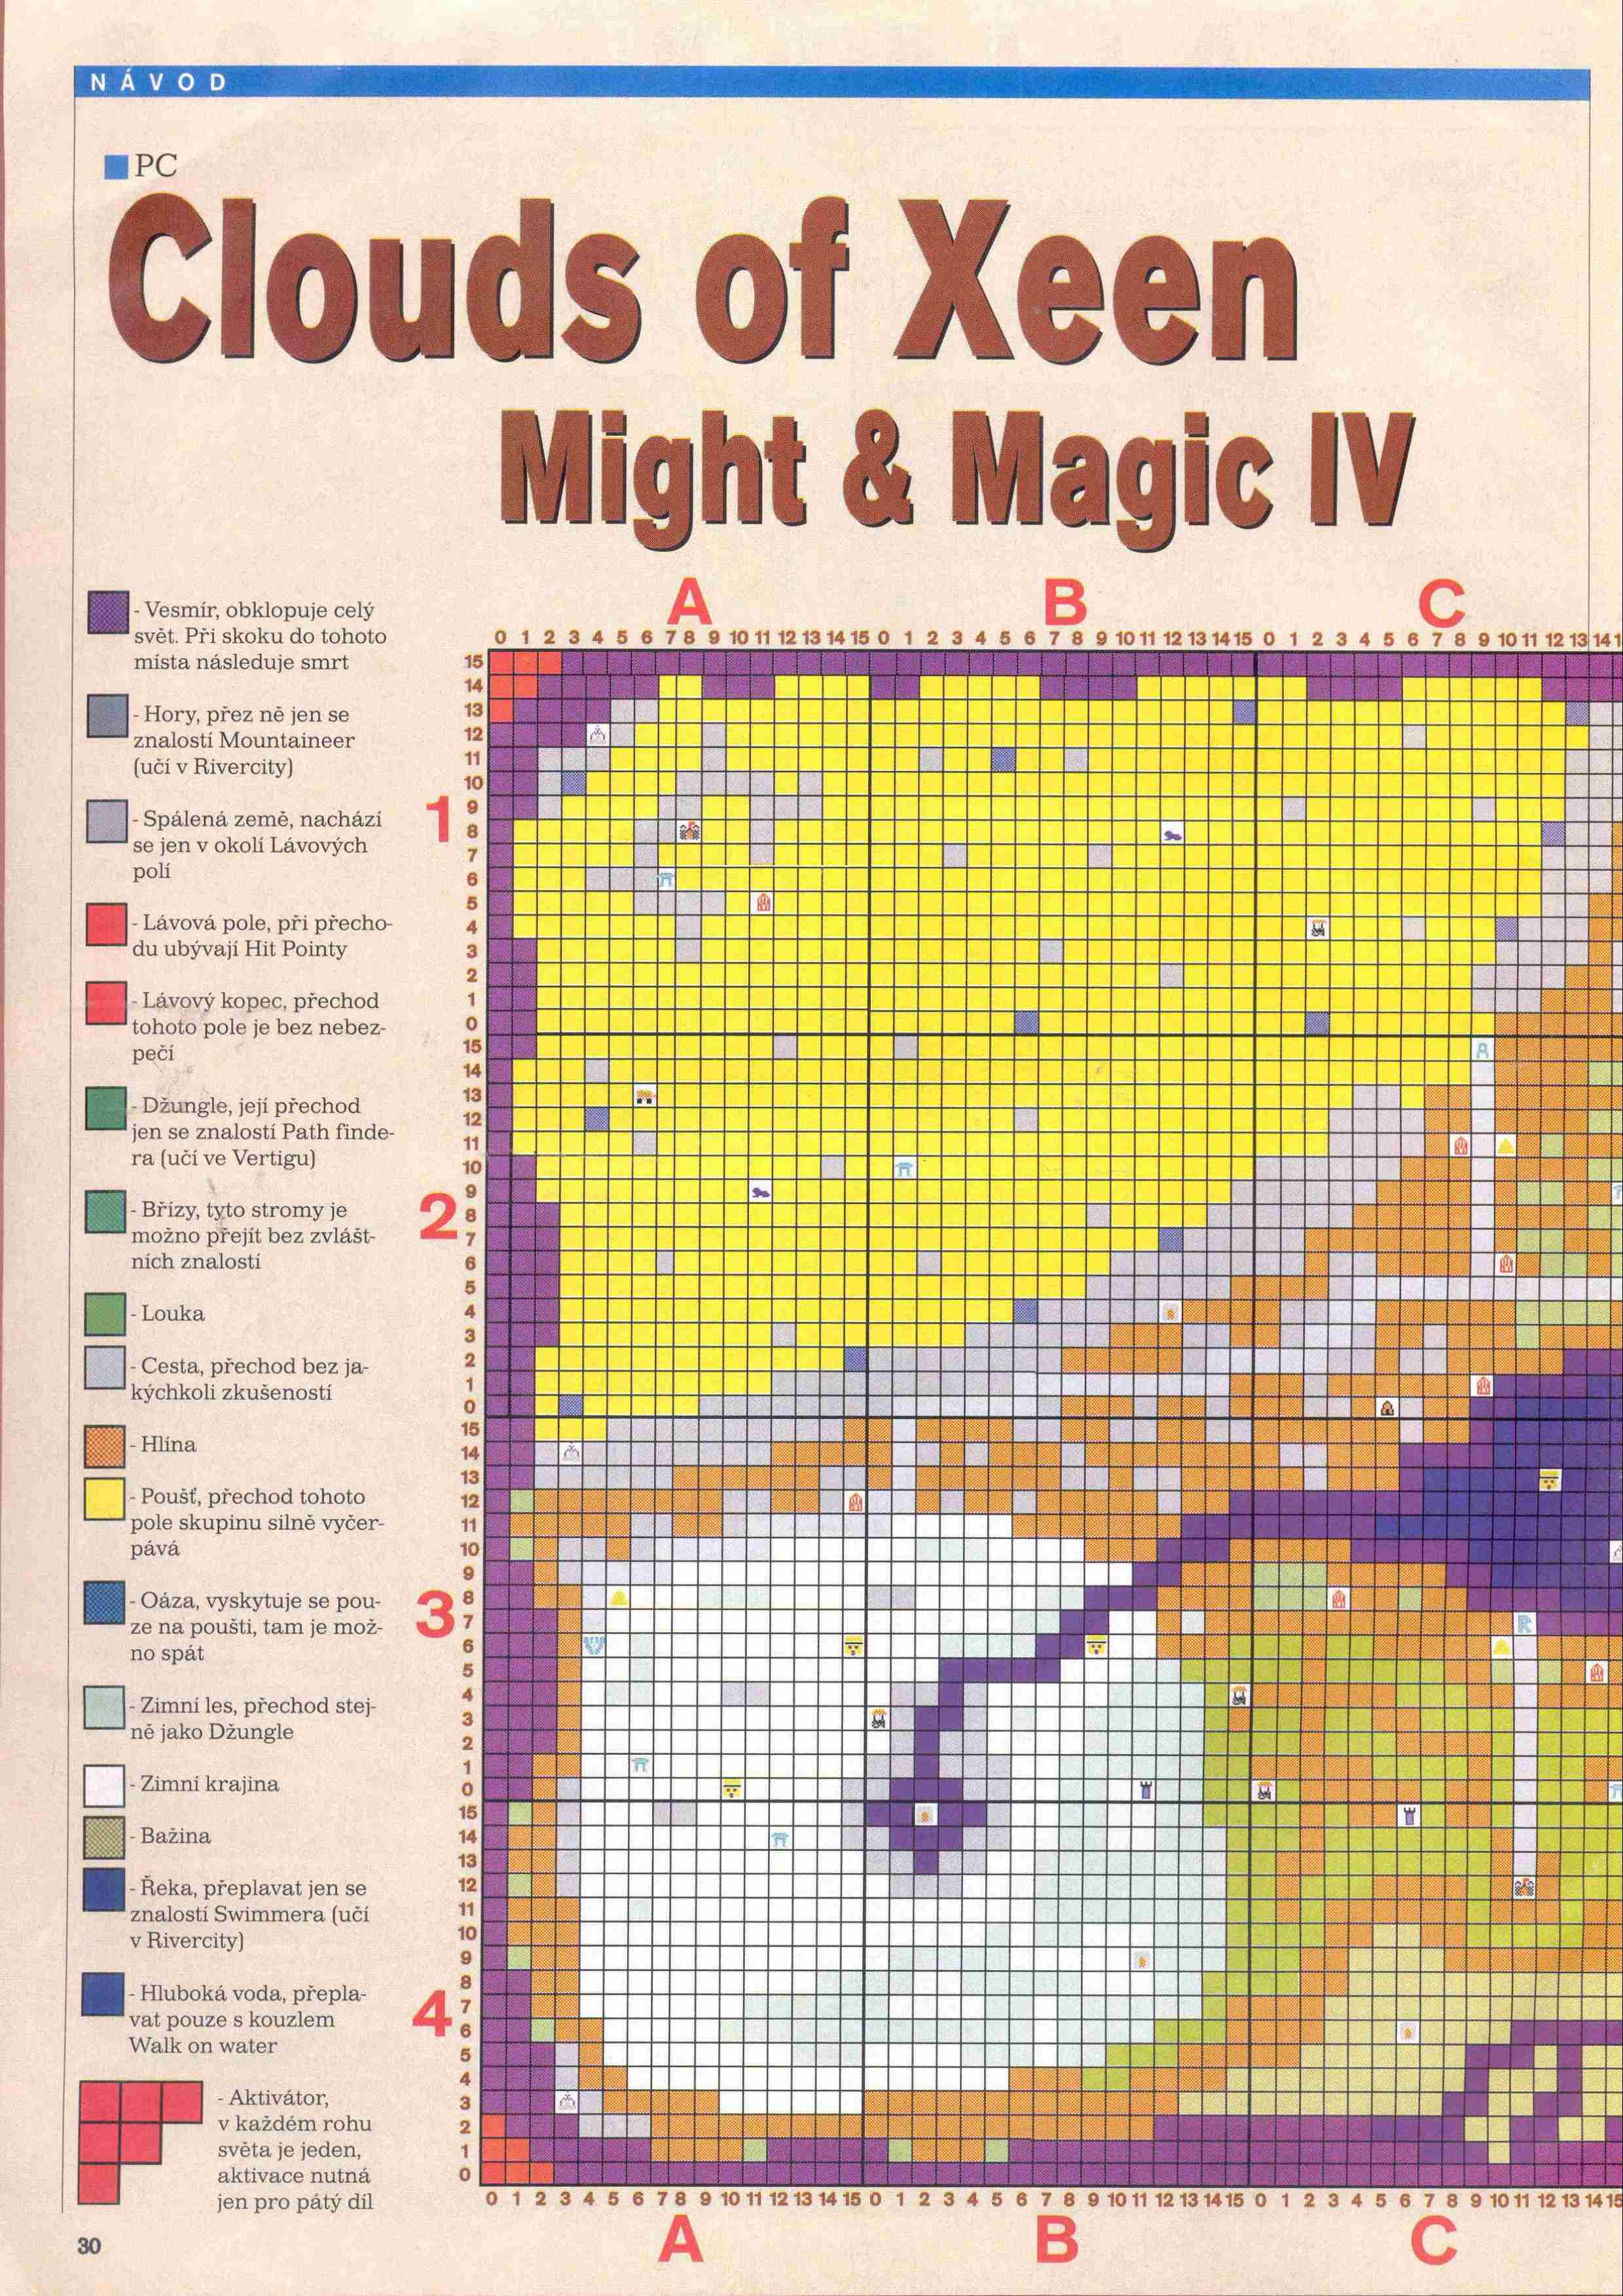 Might and Magic IV- Clouds of Xeen, návod, part 1, Excalibur 38-1995